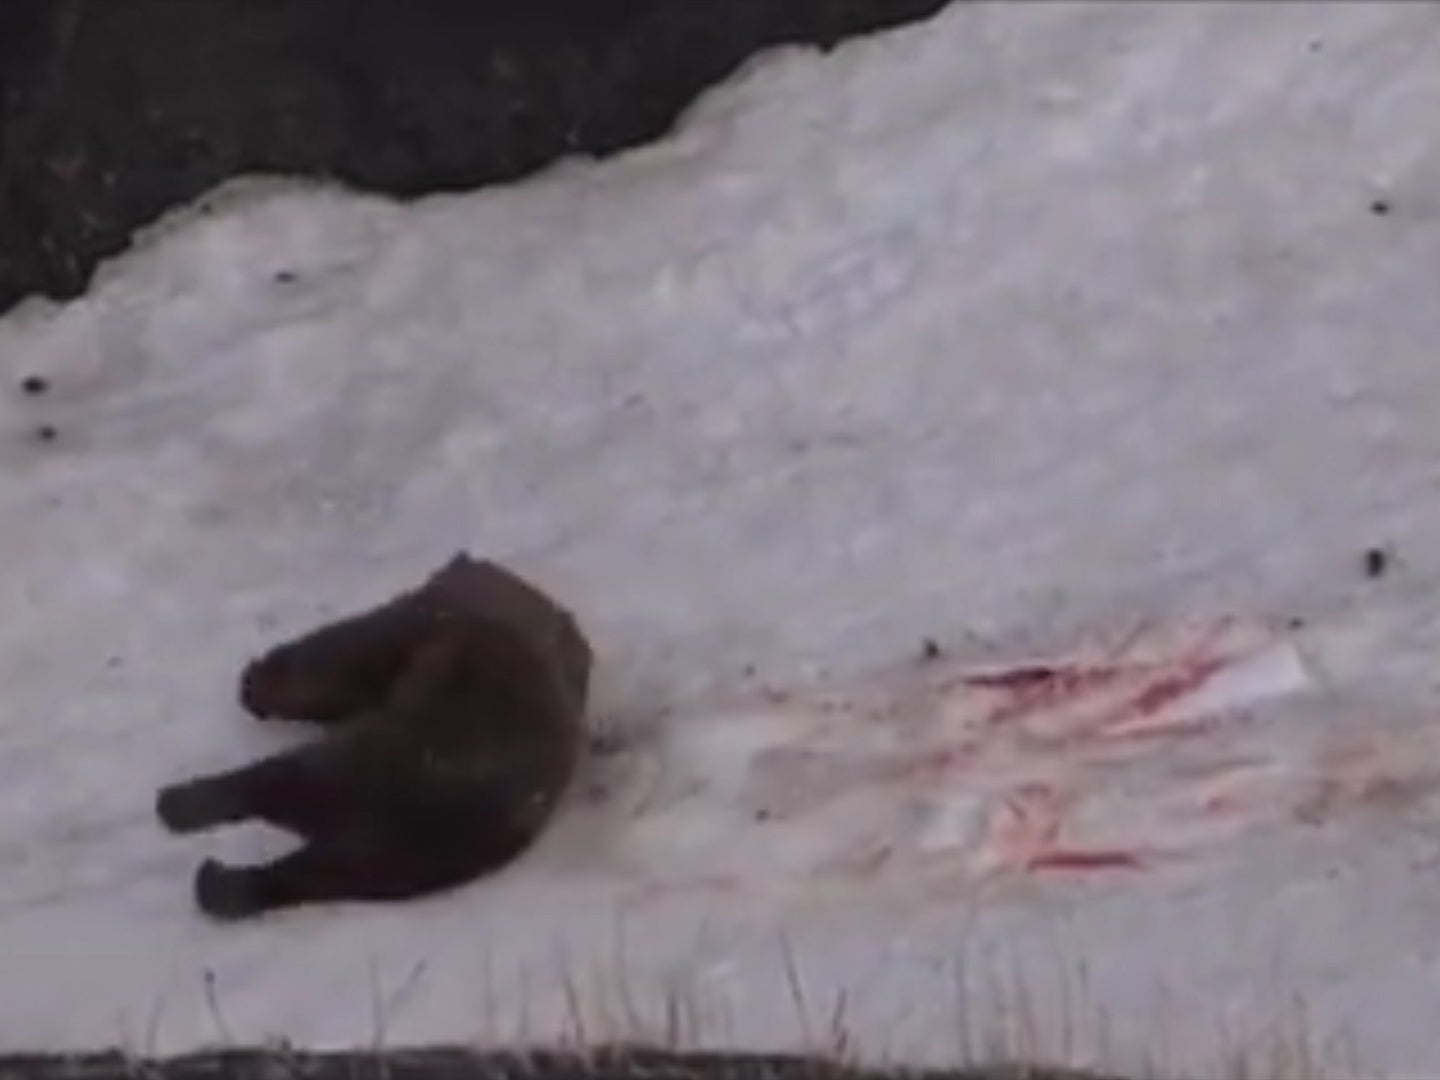 The Grizzly bear is shot again and tumbles down the hill